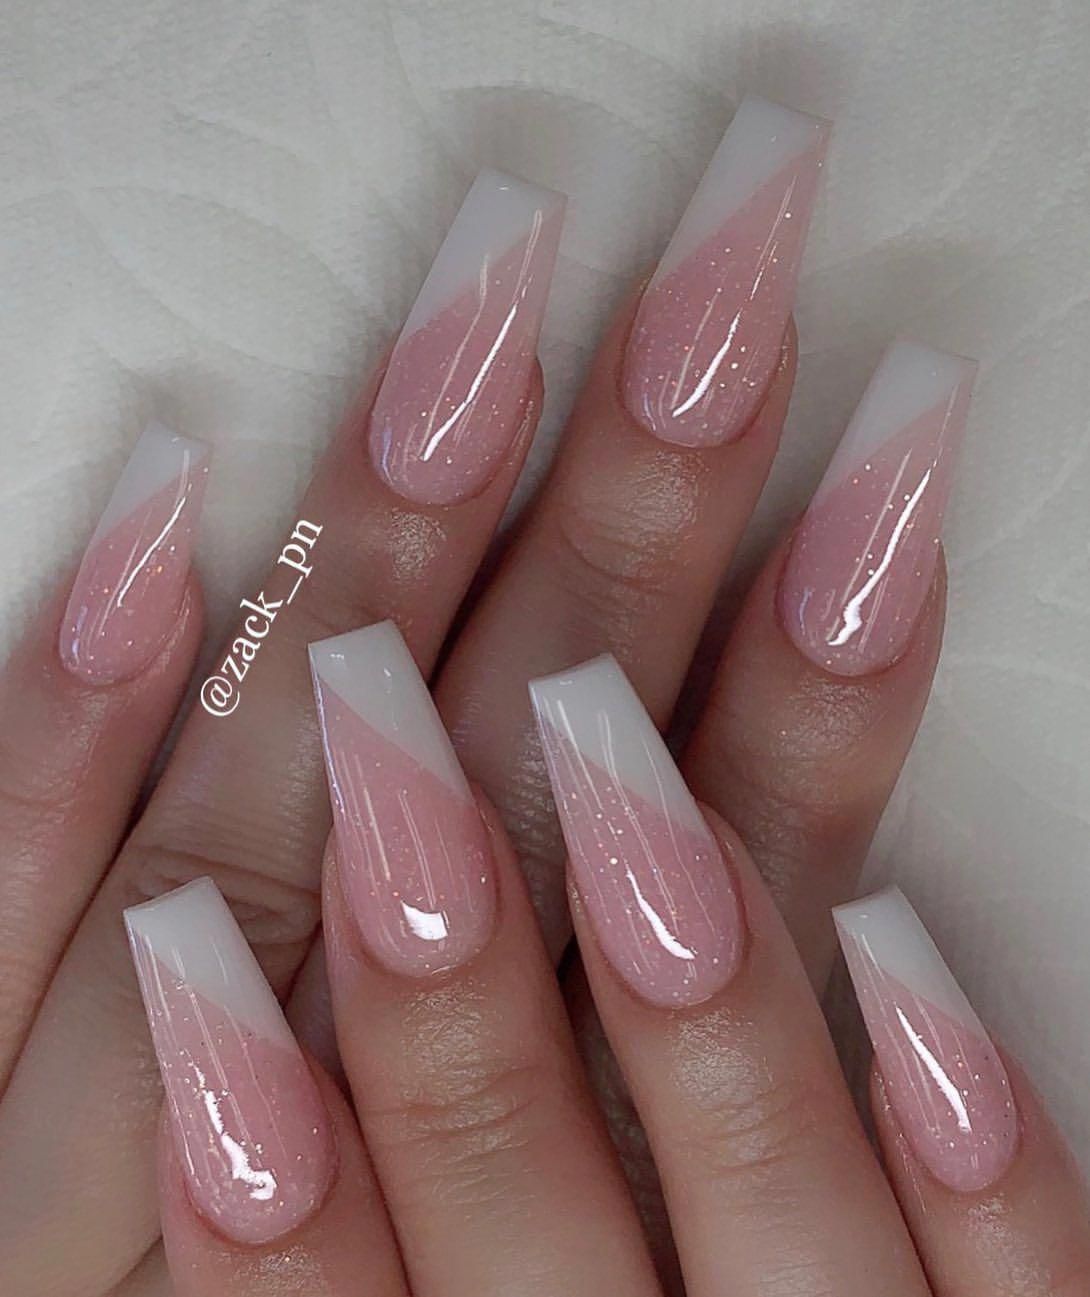 How To Do Gel Nails At Home In 2020 Gelove Nehty Akrylove Nehty Nehty